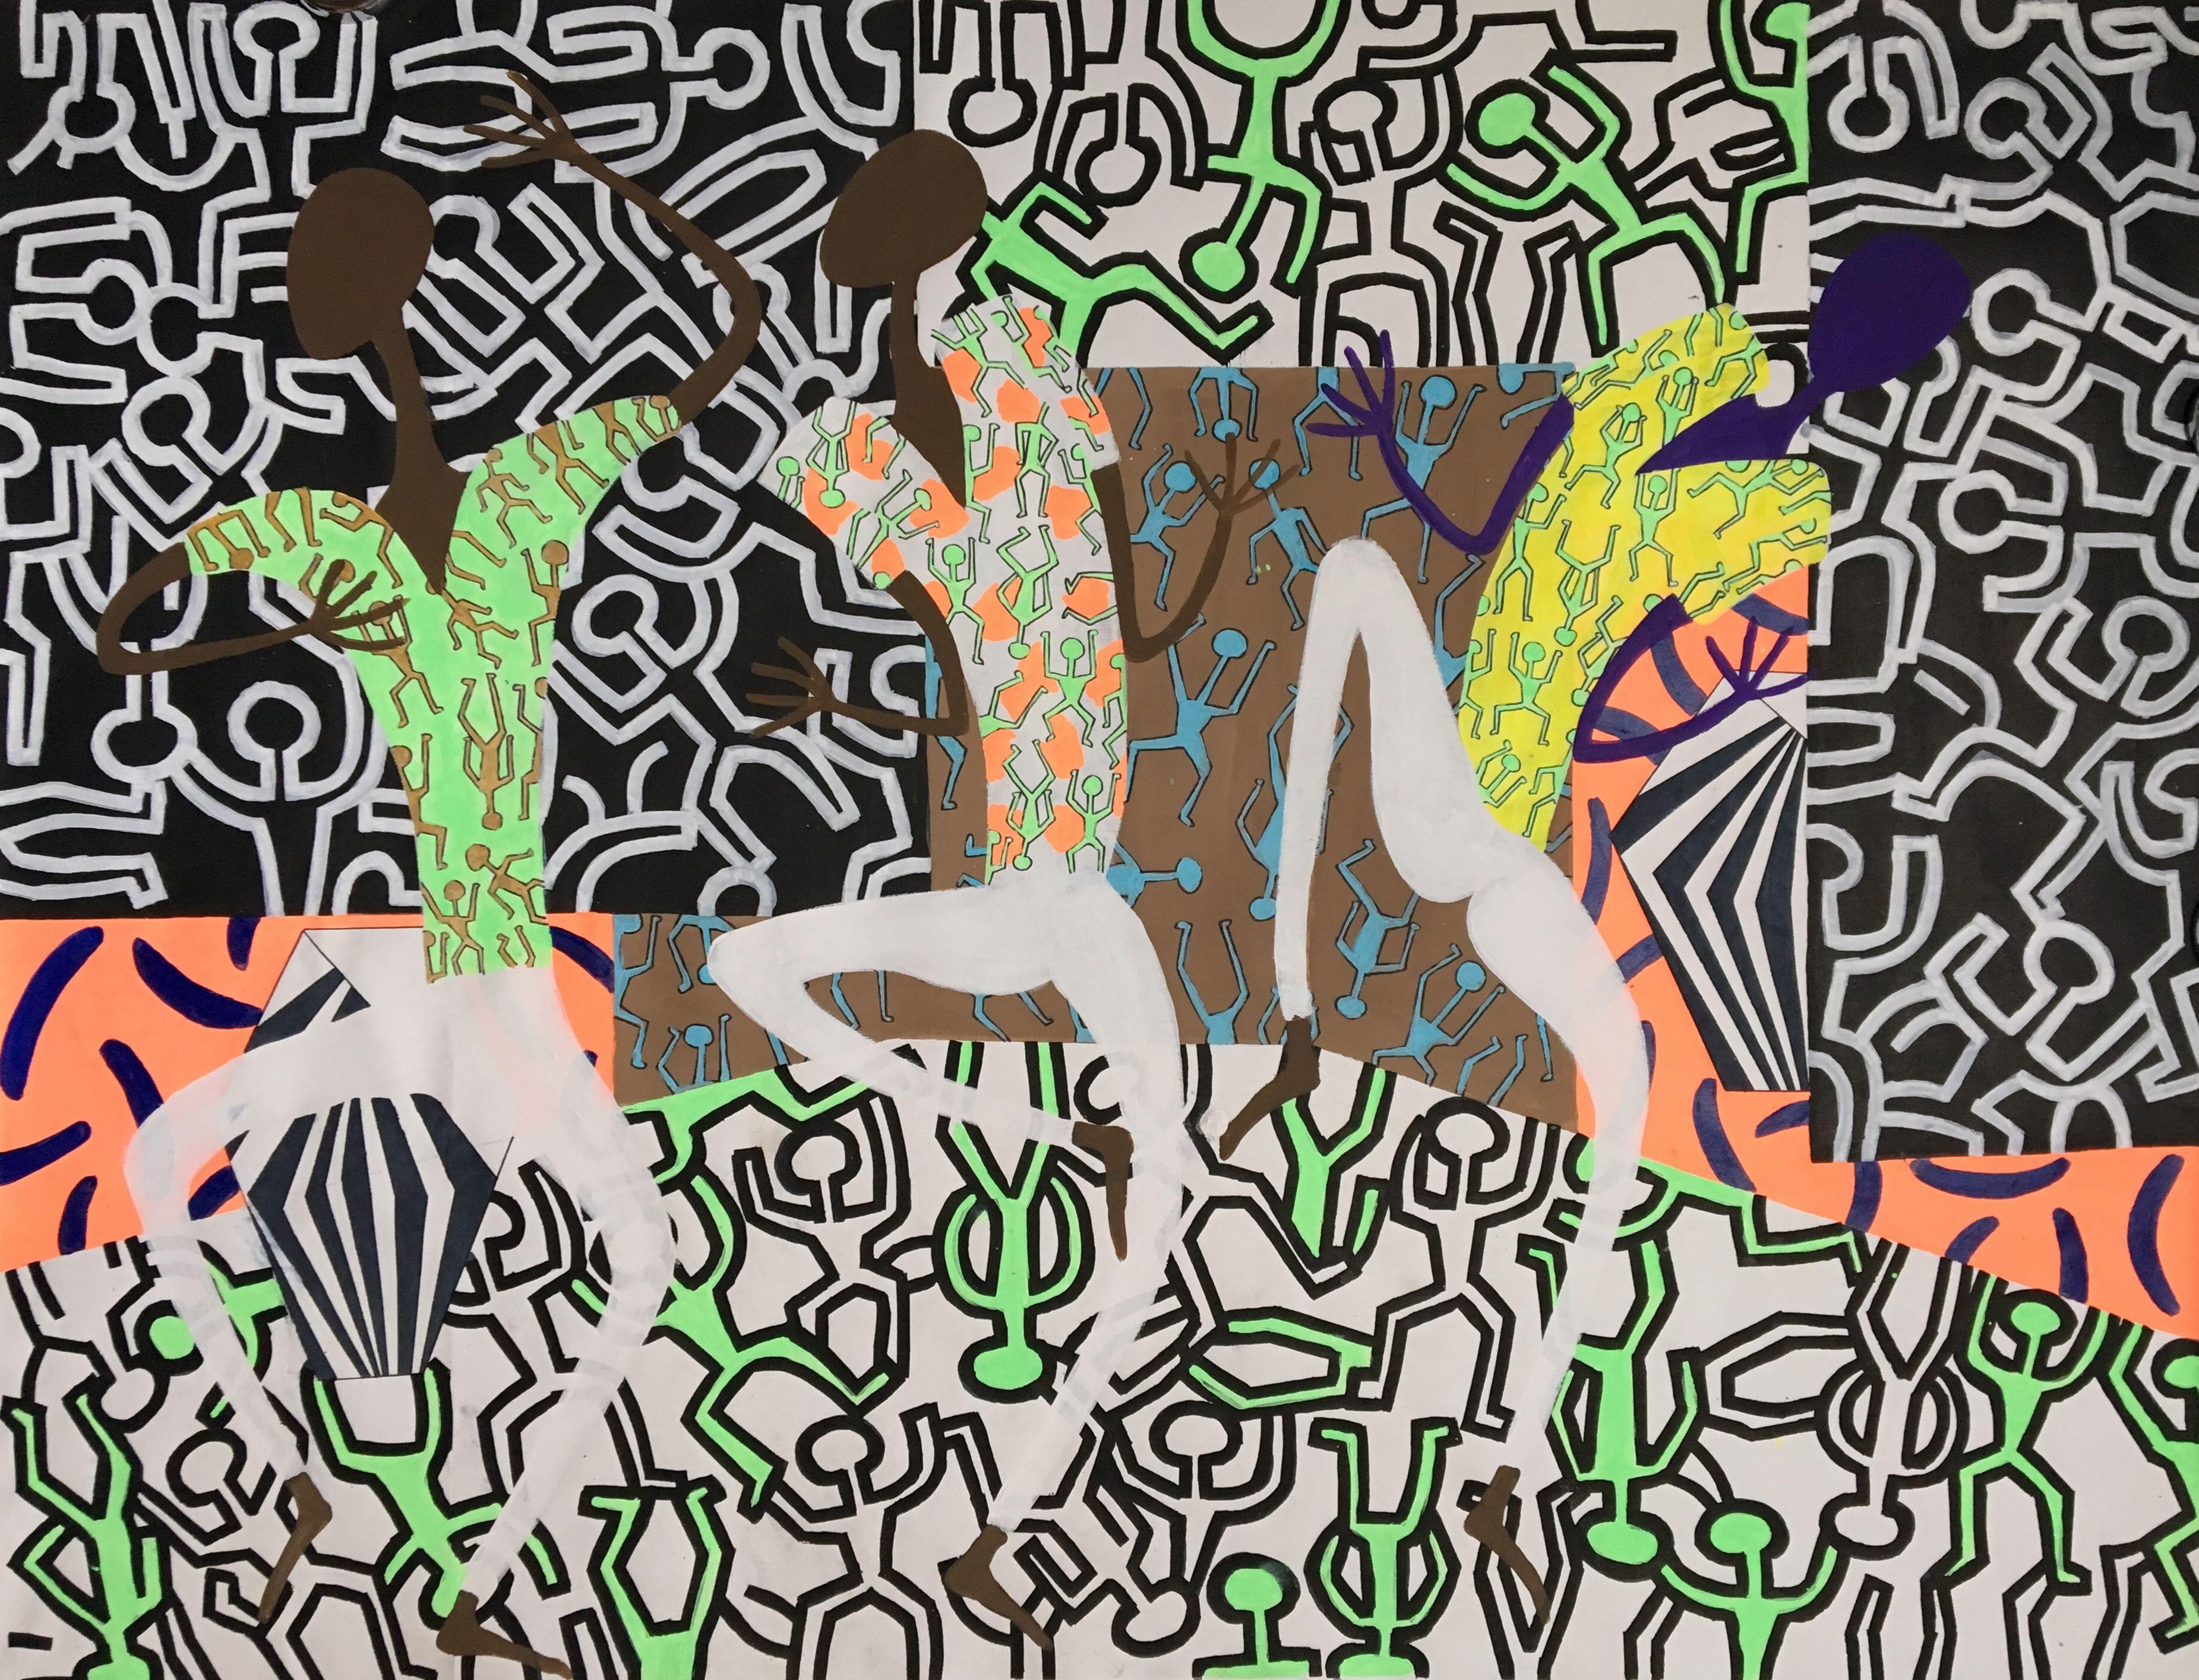 acrylic on the canvas, inspired by African art and by contemporary art directions. Expressing 3 african - like figures on background highly inspired by Haring's artworks. :: Painting :: Contemporary :: This piece comes with an official certificate